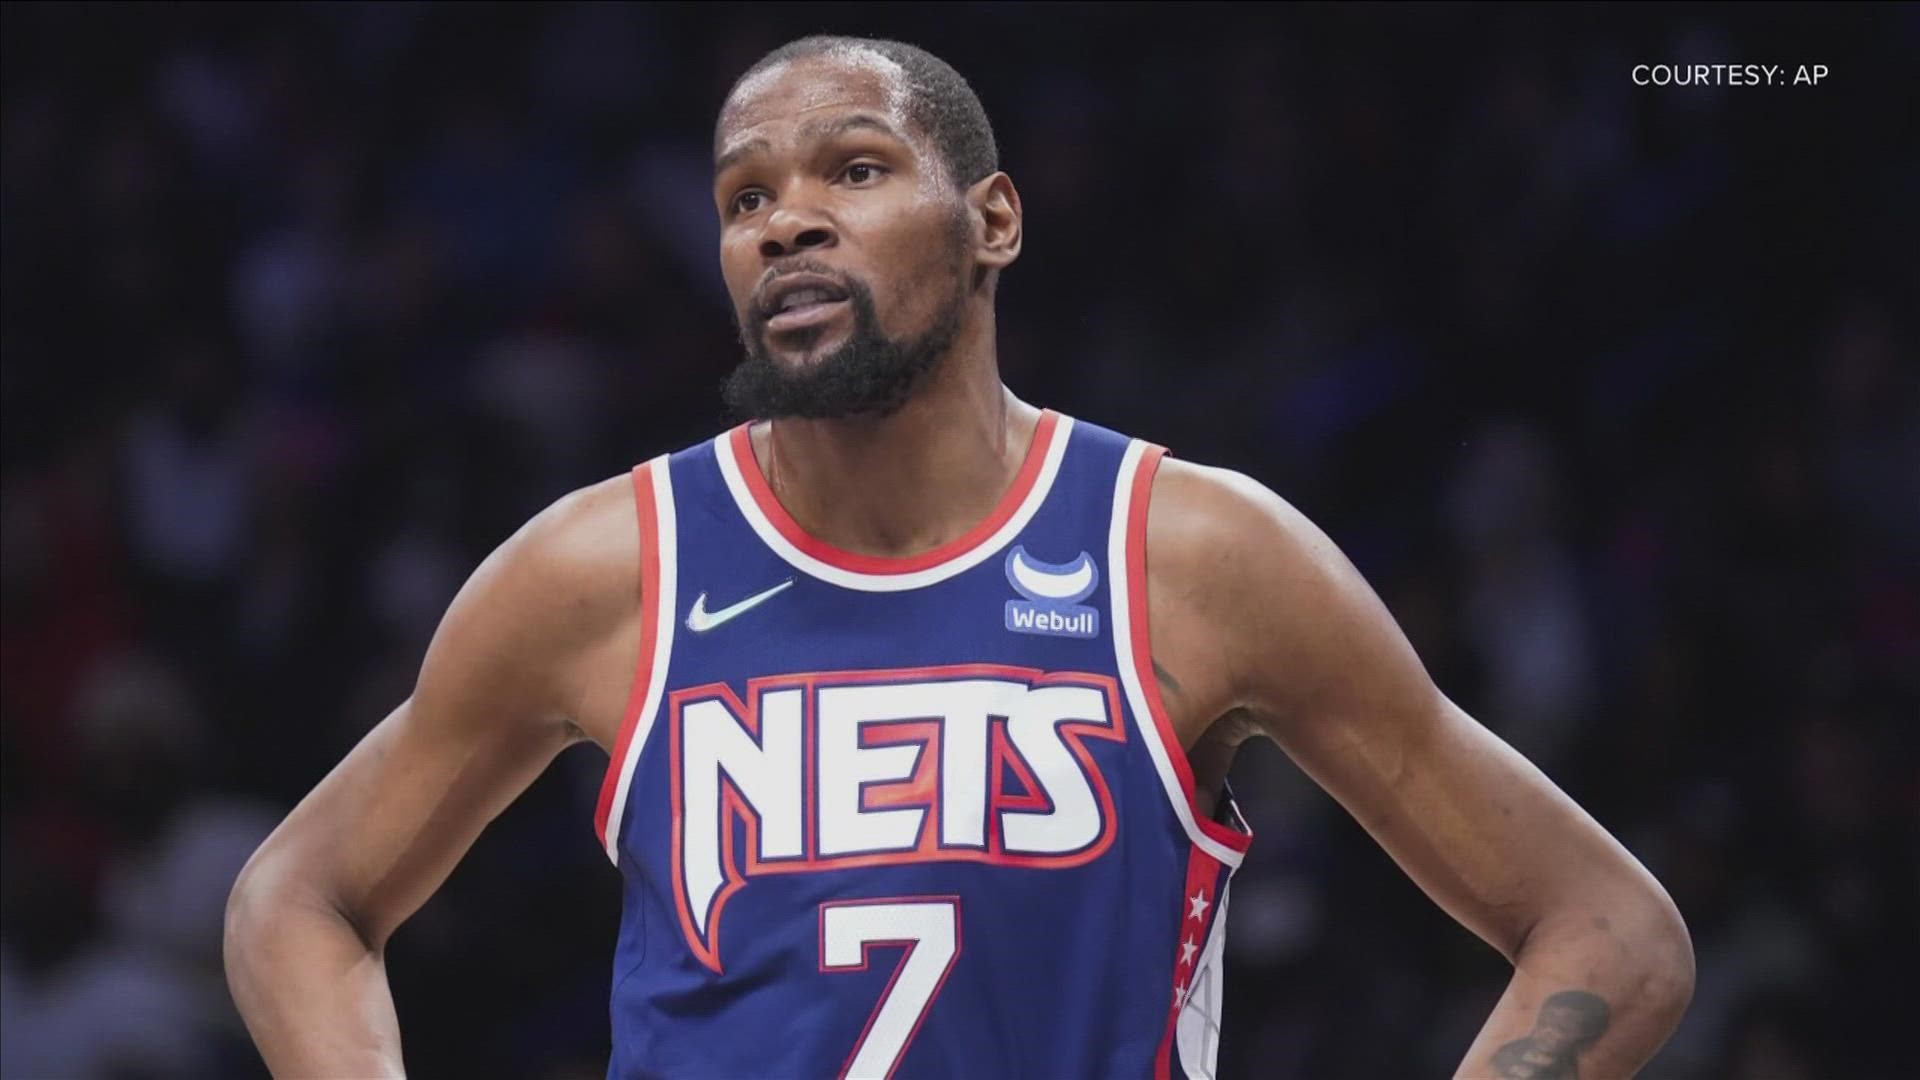 NBA insiders reported Memphis has interest in Durant. But is this realistic for the Grizzlies? ABC24 spoke with Memphis and Brooklyn sports writers to find out.